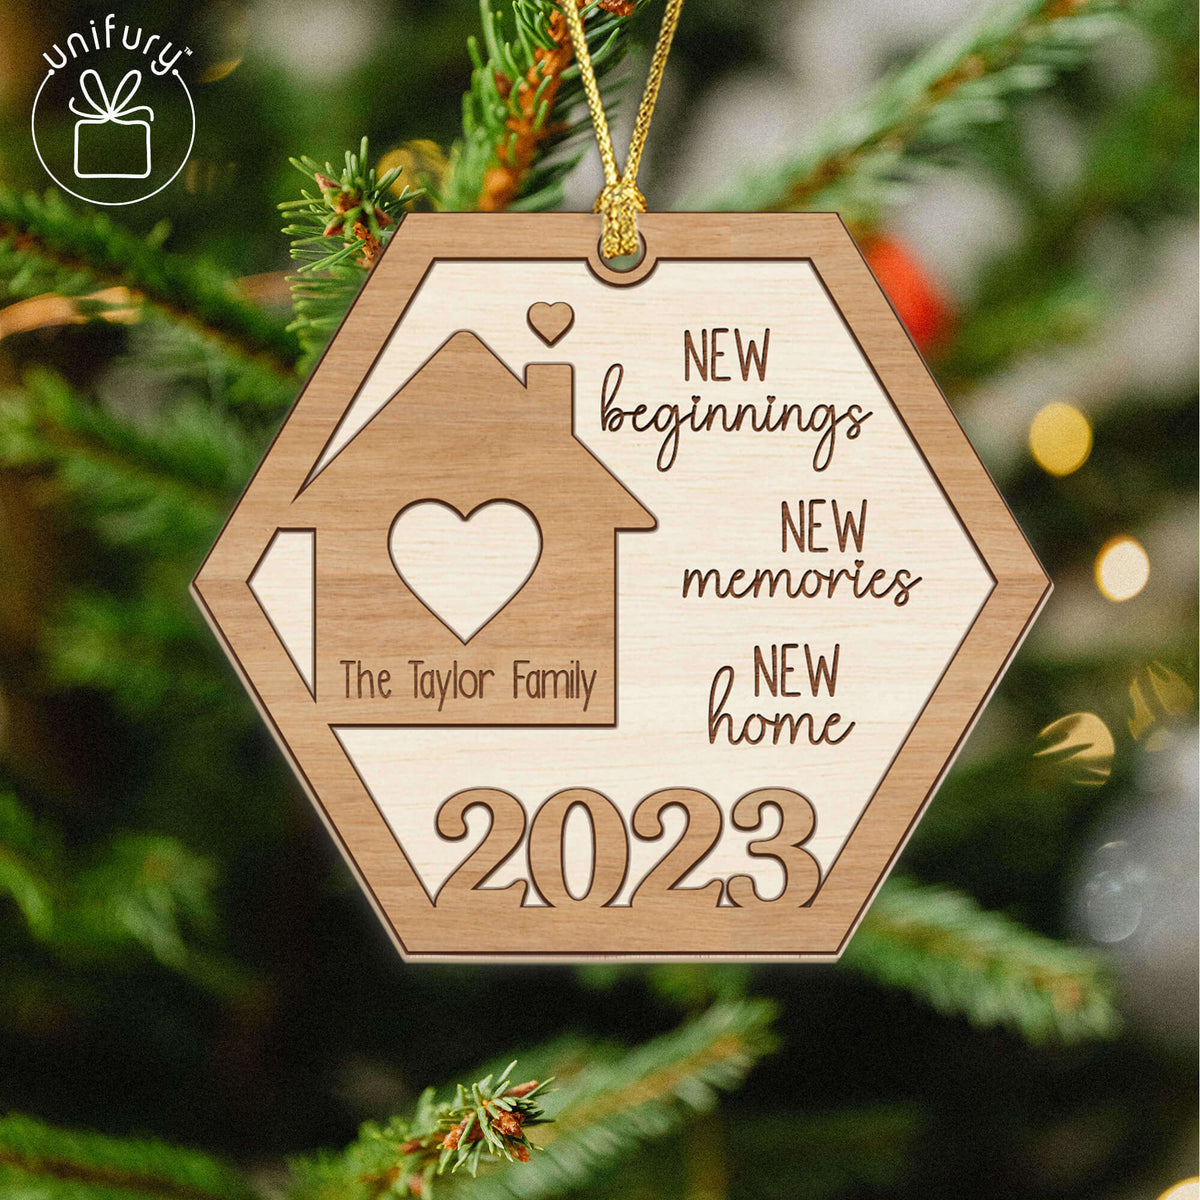 Our First Home as Family Wooden Shape Ornament